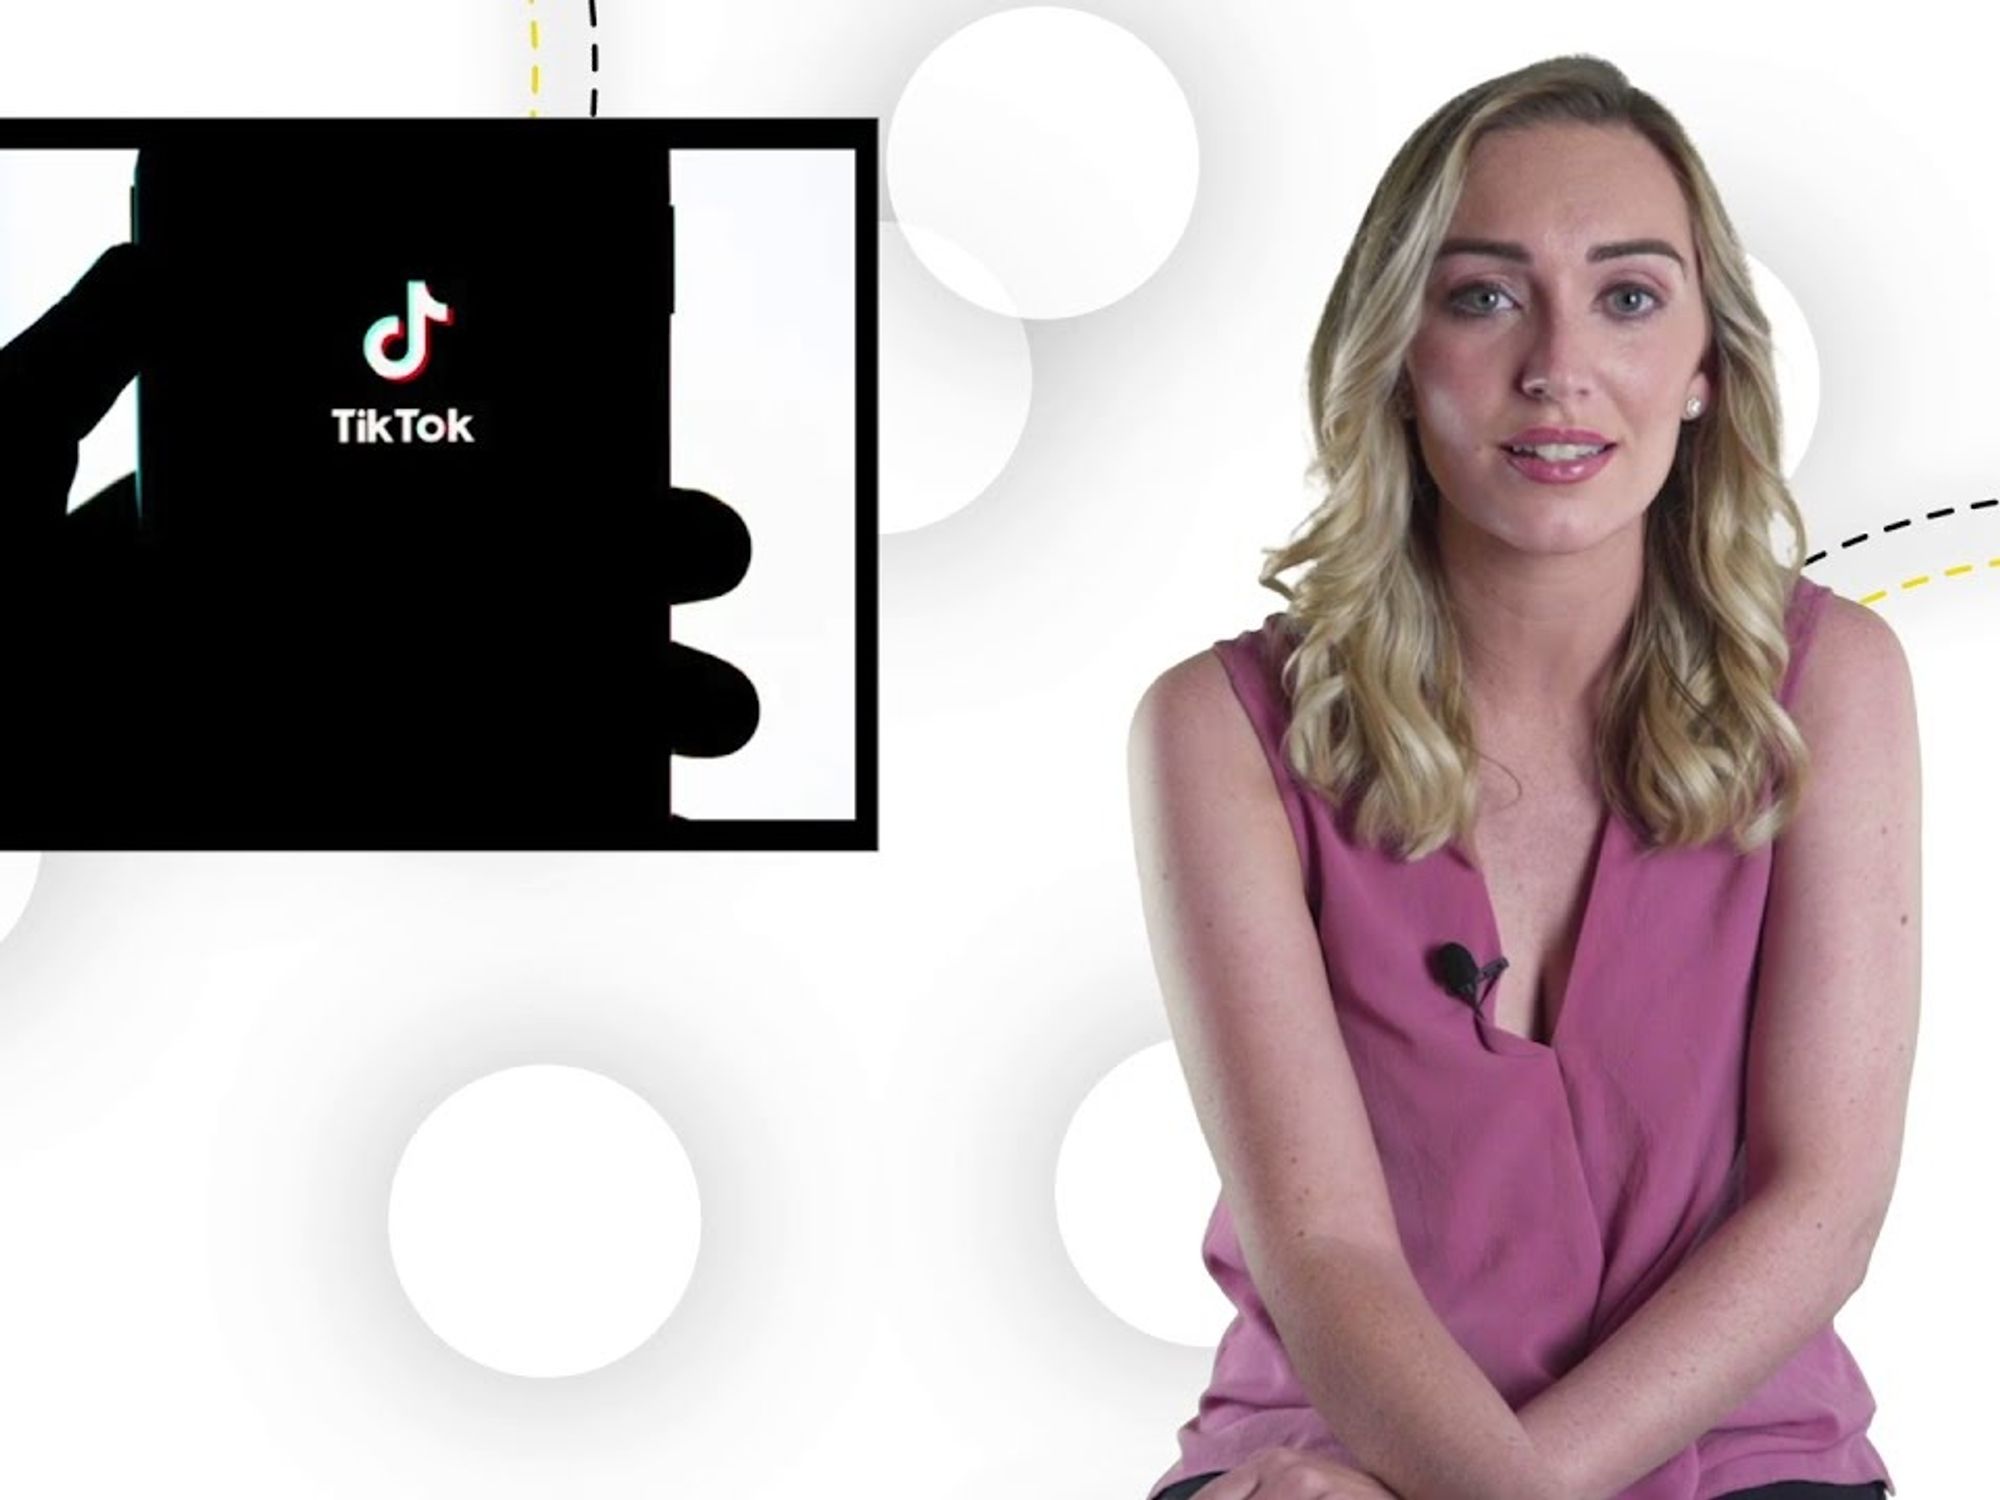 Catch Up On This Week's Top 5 Stories With Our Video Recap